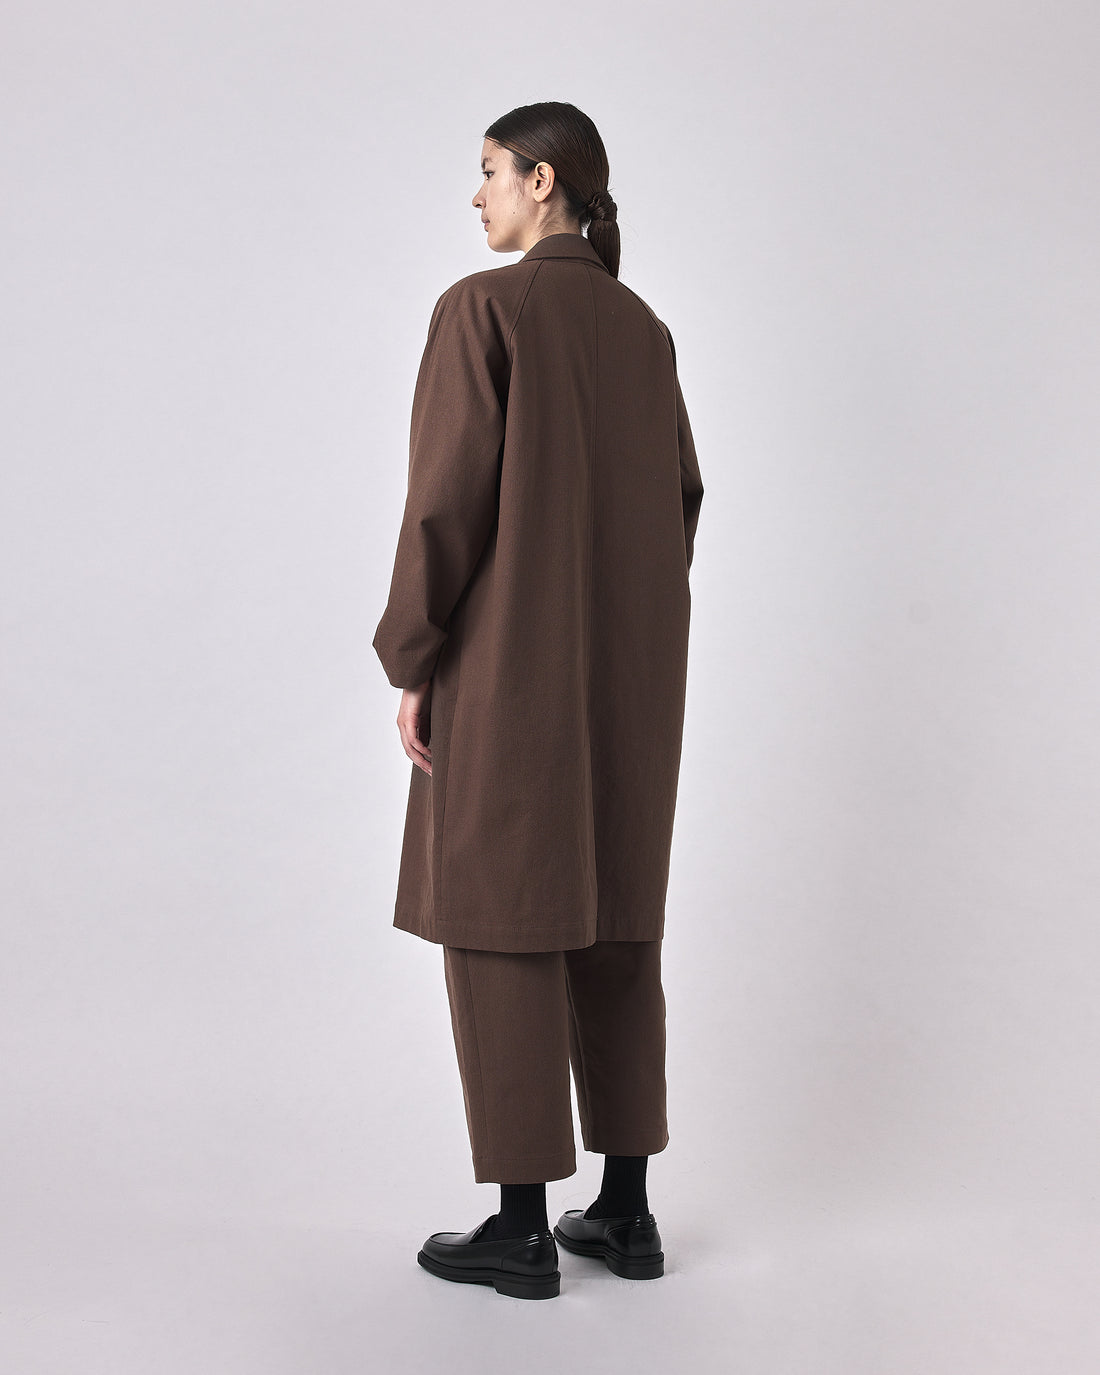 Signature Fall Duster - Fall Edition - Brown